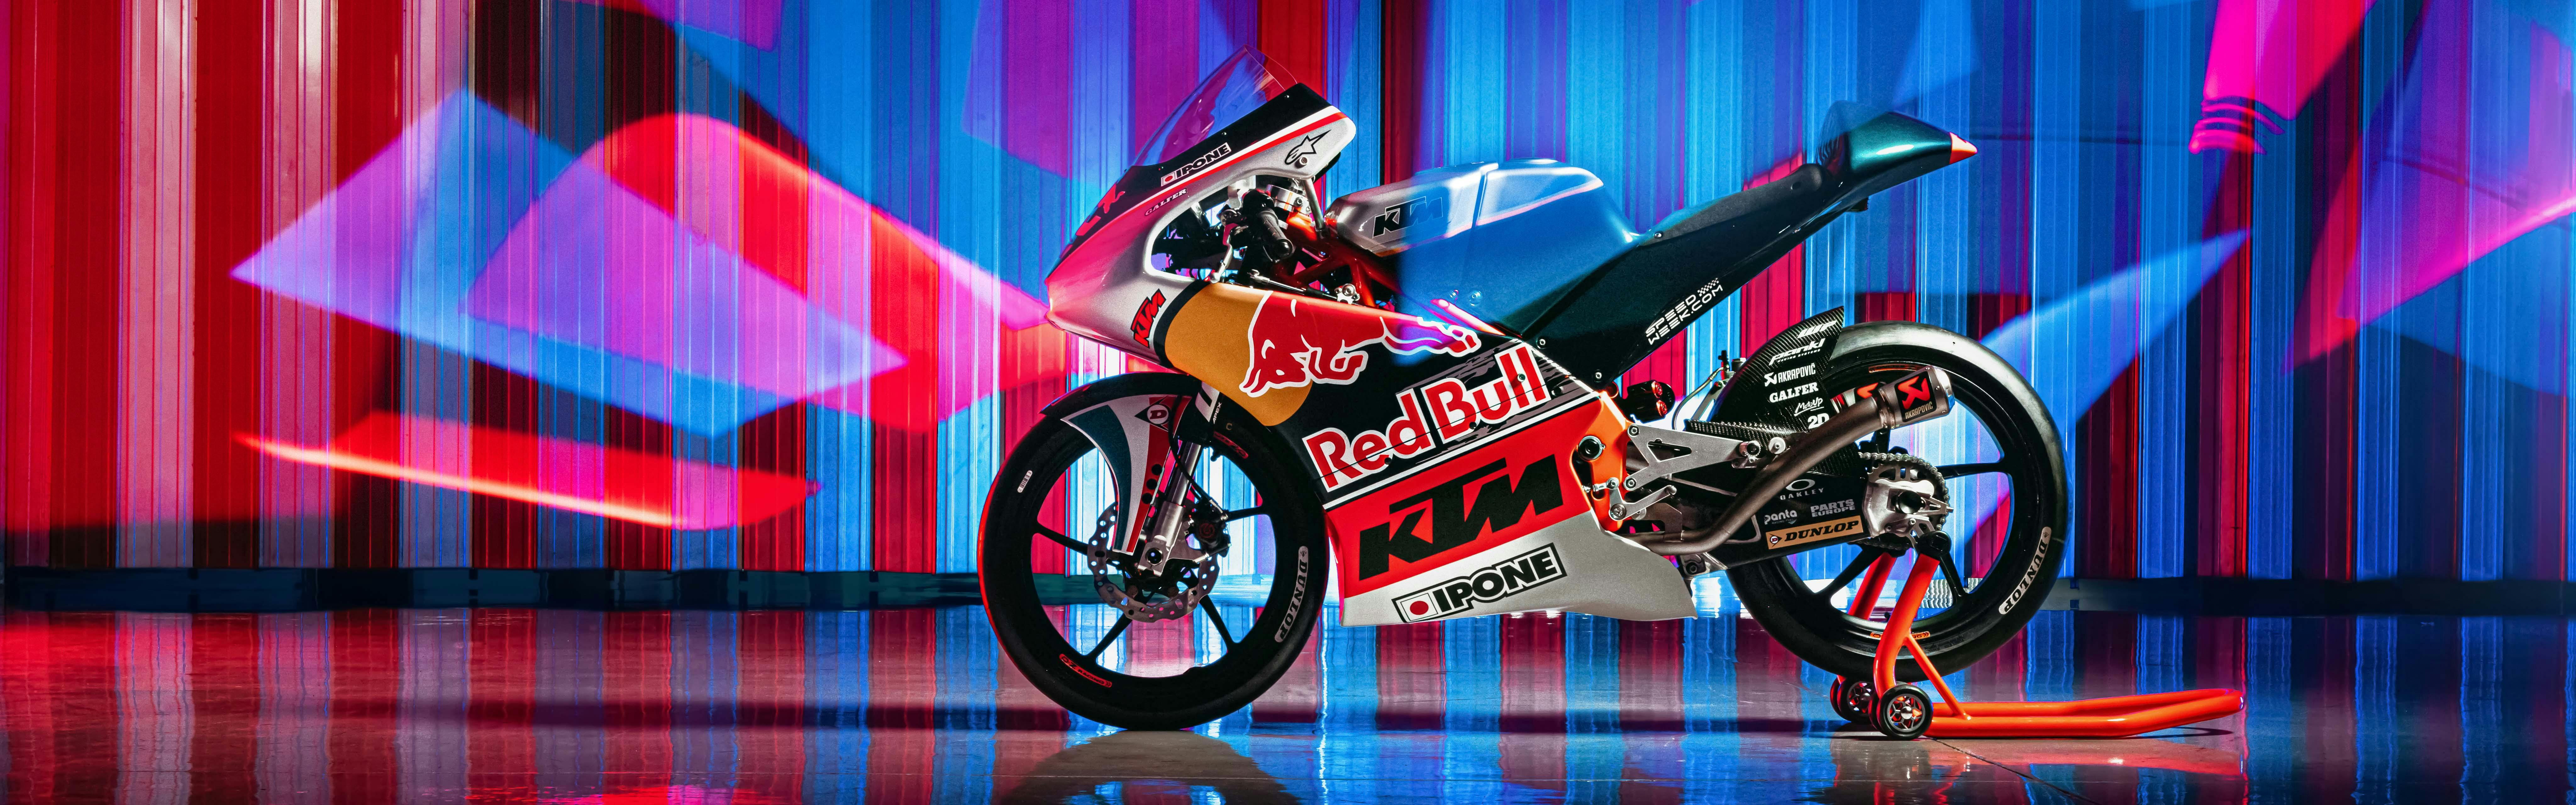 Red Bull Motogp Rookies Cup: A Dream Come True | Ipone